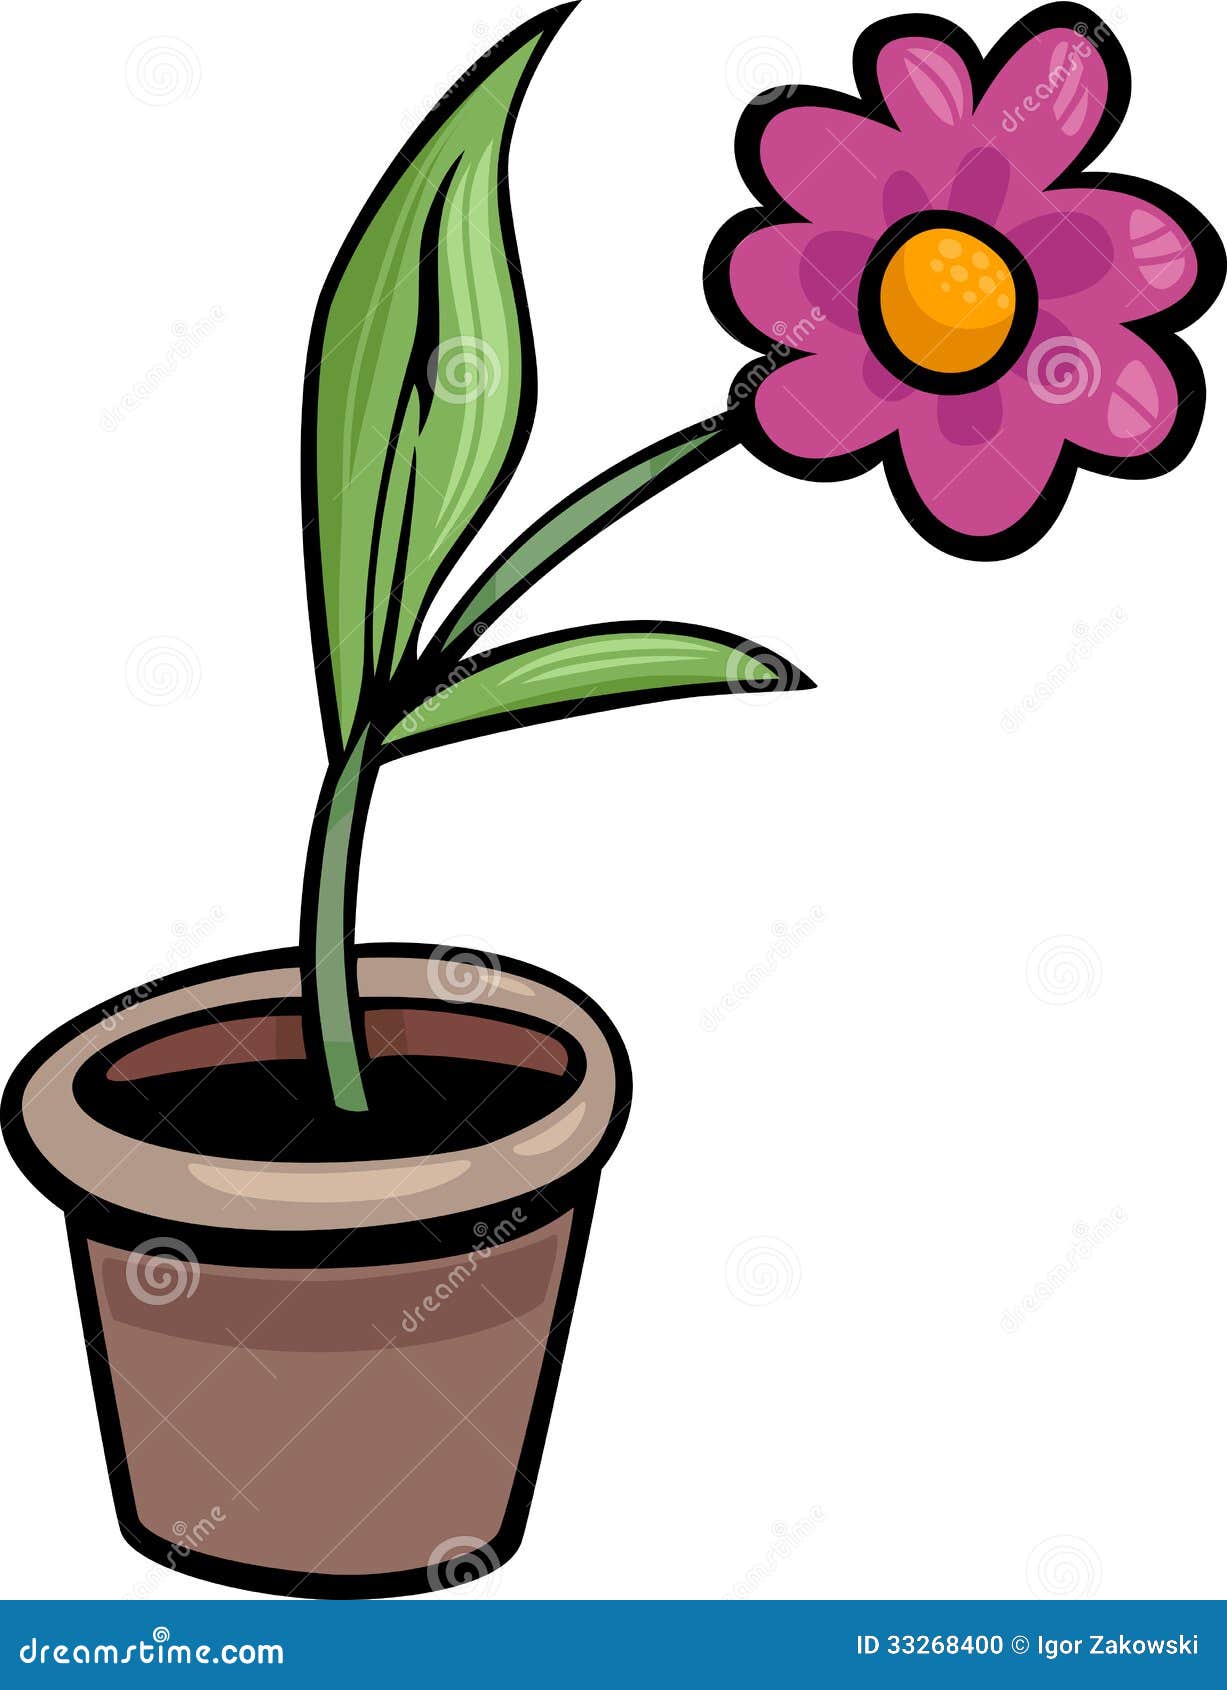 clipart flower in pot - photo #16